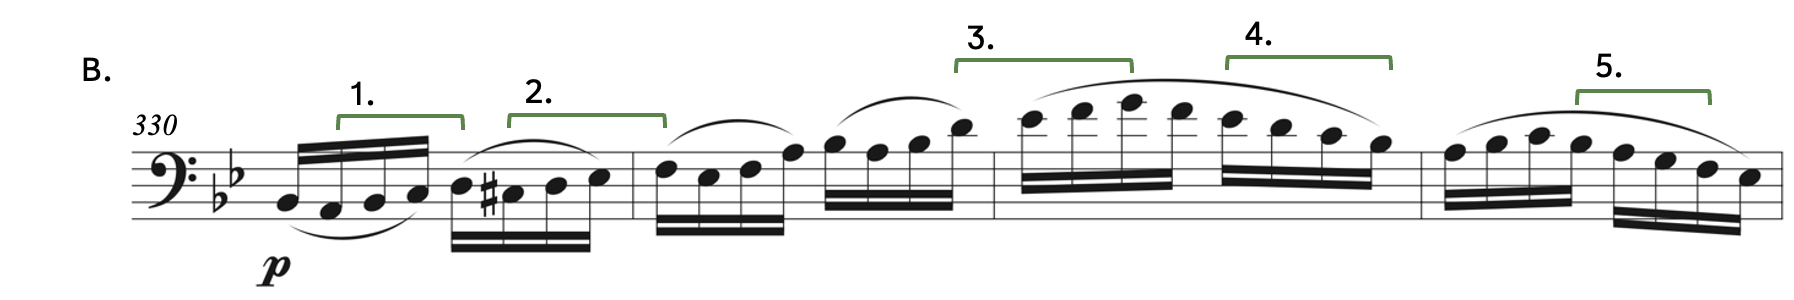 Farrenc, Cello Sonata, op. 46, third movement - Finale. Allegro. Number 1 points to the pitches A, B-flat, C, D. Number 2 points to the pitches C-sharp, D, E-flat, F. Number 3 points to the pitches D, E-flat, F, G. Number 4 points to the pitches E-flat, D, C, B-flat. Number 5 points to the pitches B-flat, A, G, F.